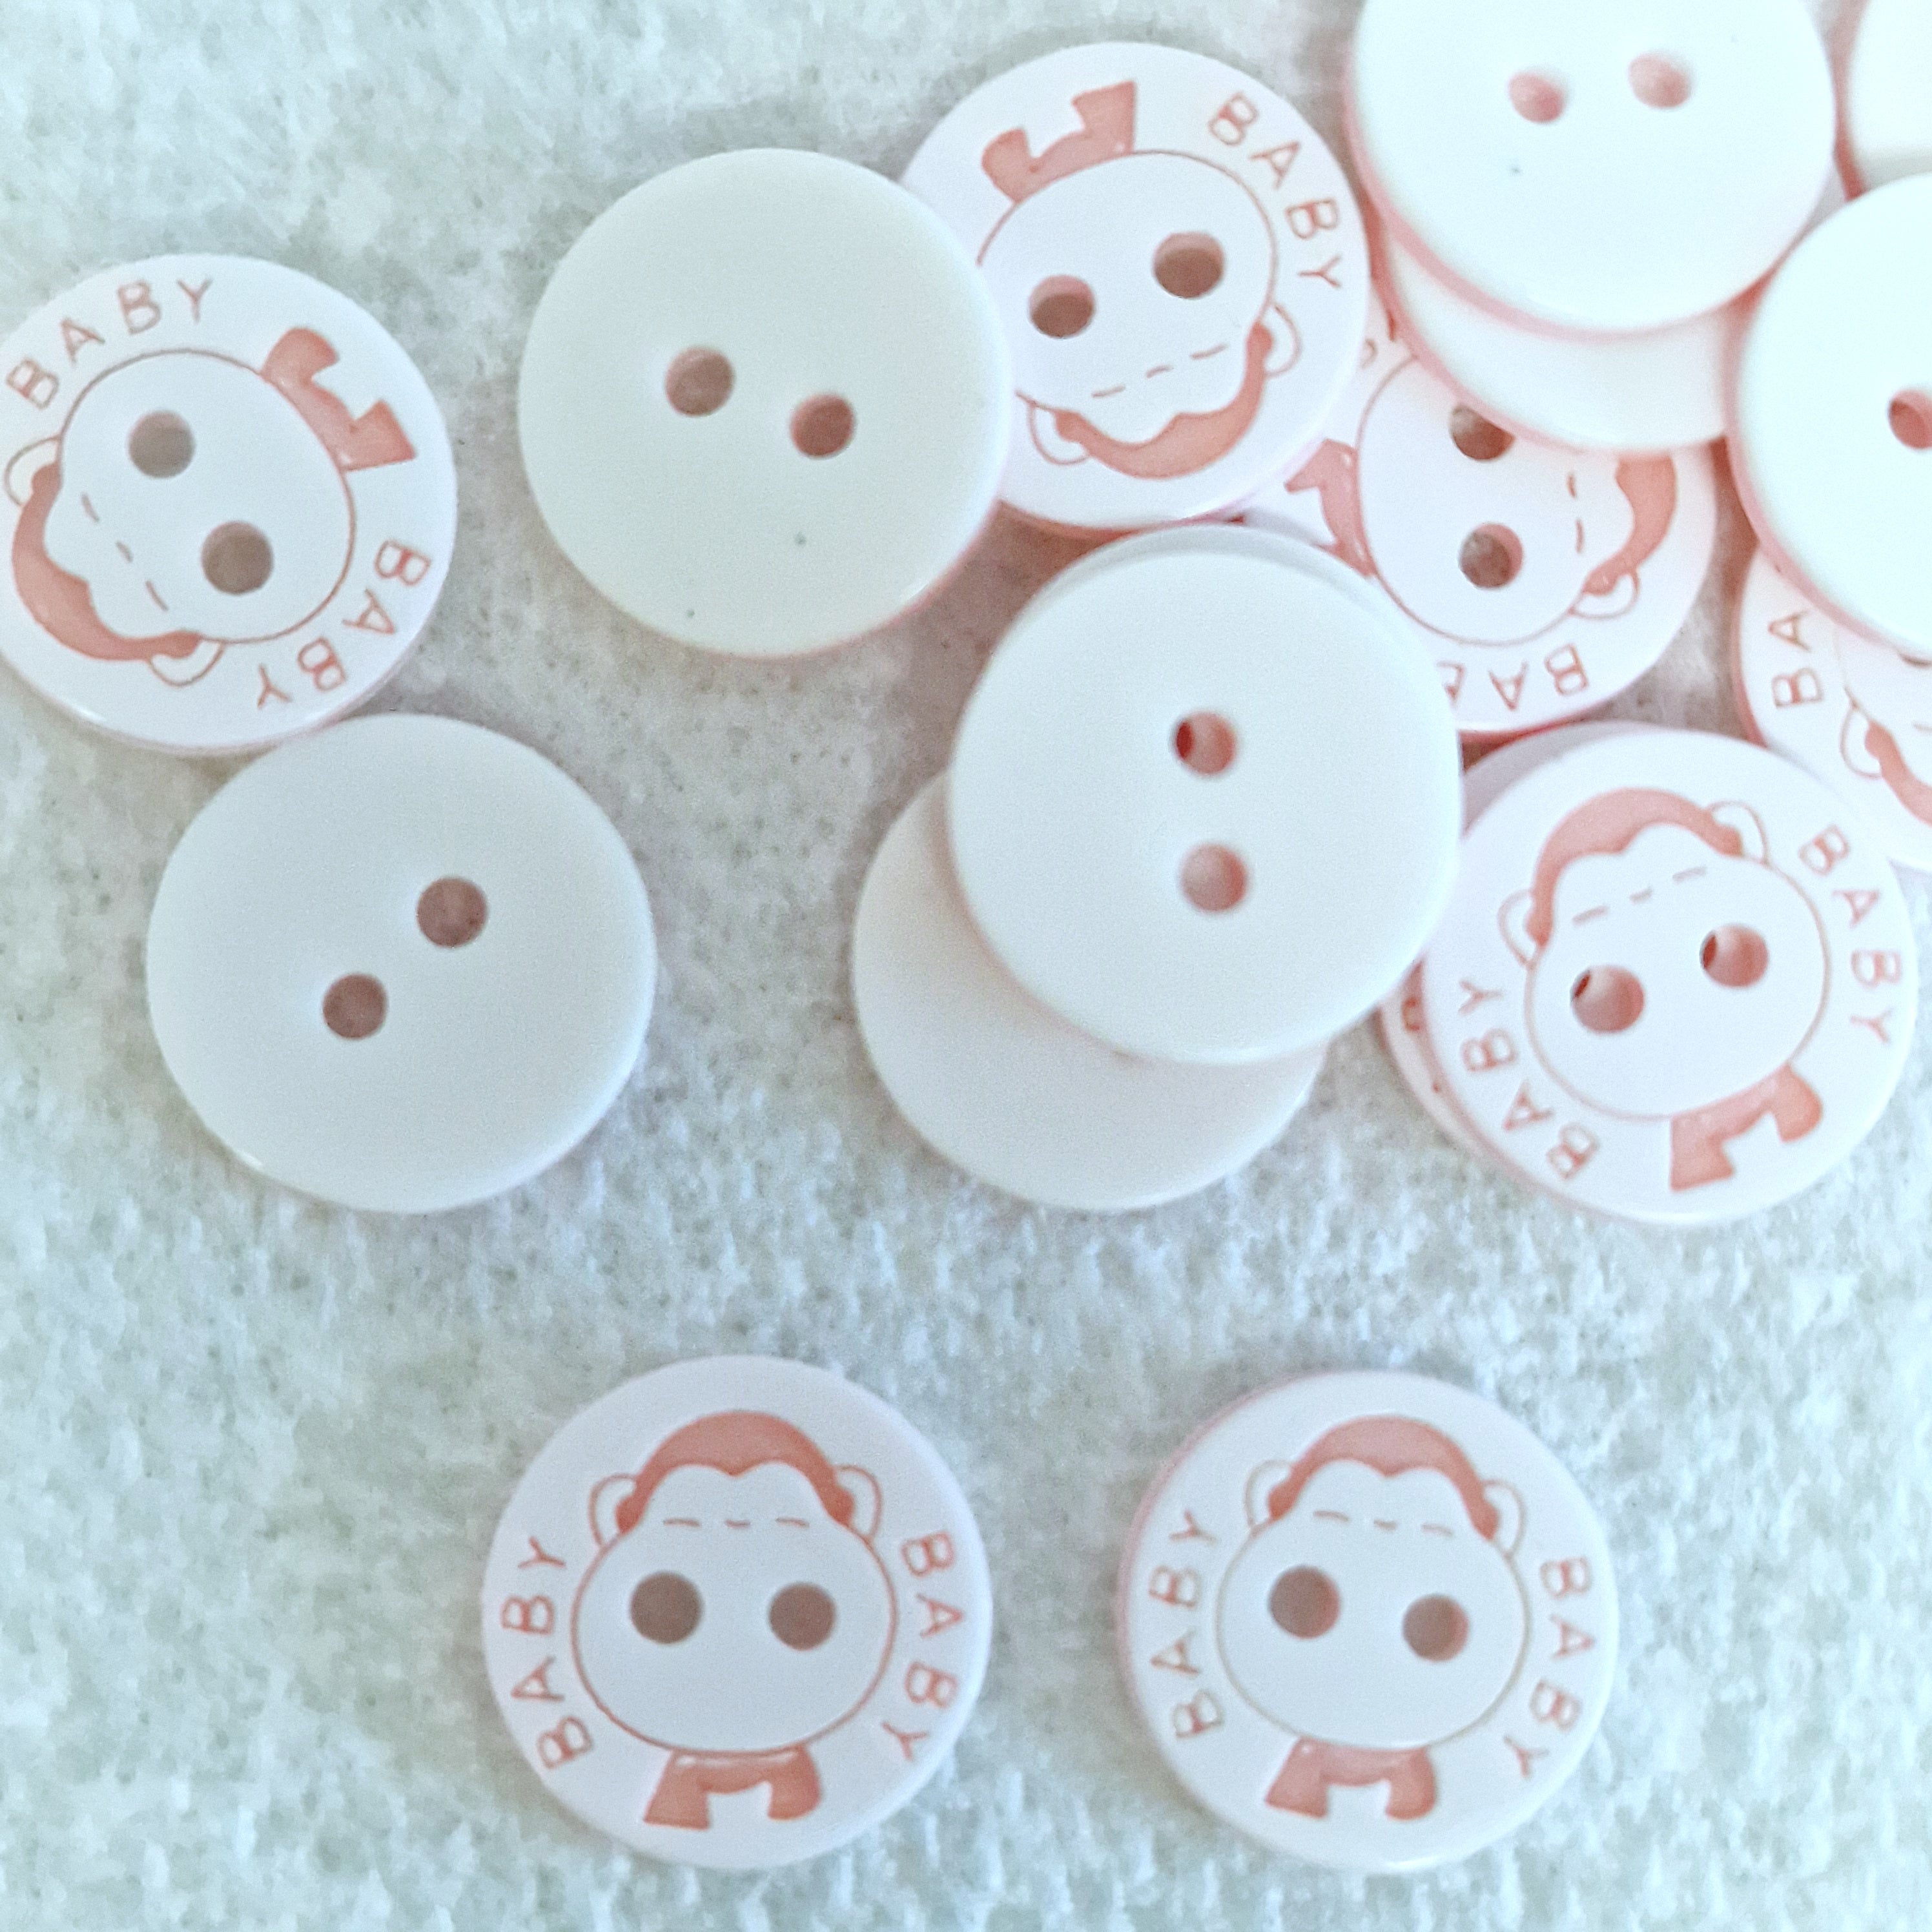 MajorCrafts 48pcs 12.5mm Light Pink & White 'Baby' Printed 2 Holes Small Round Resin Sewing Buttons